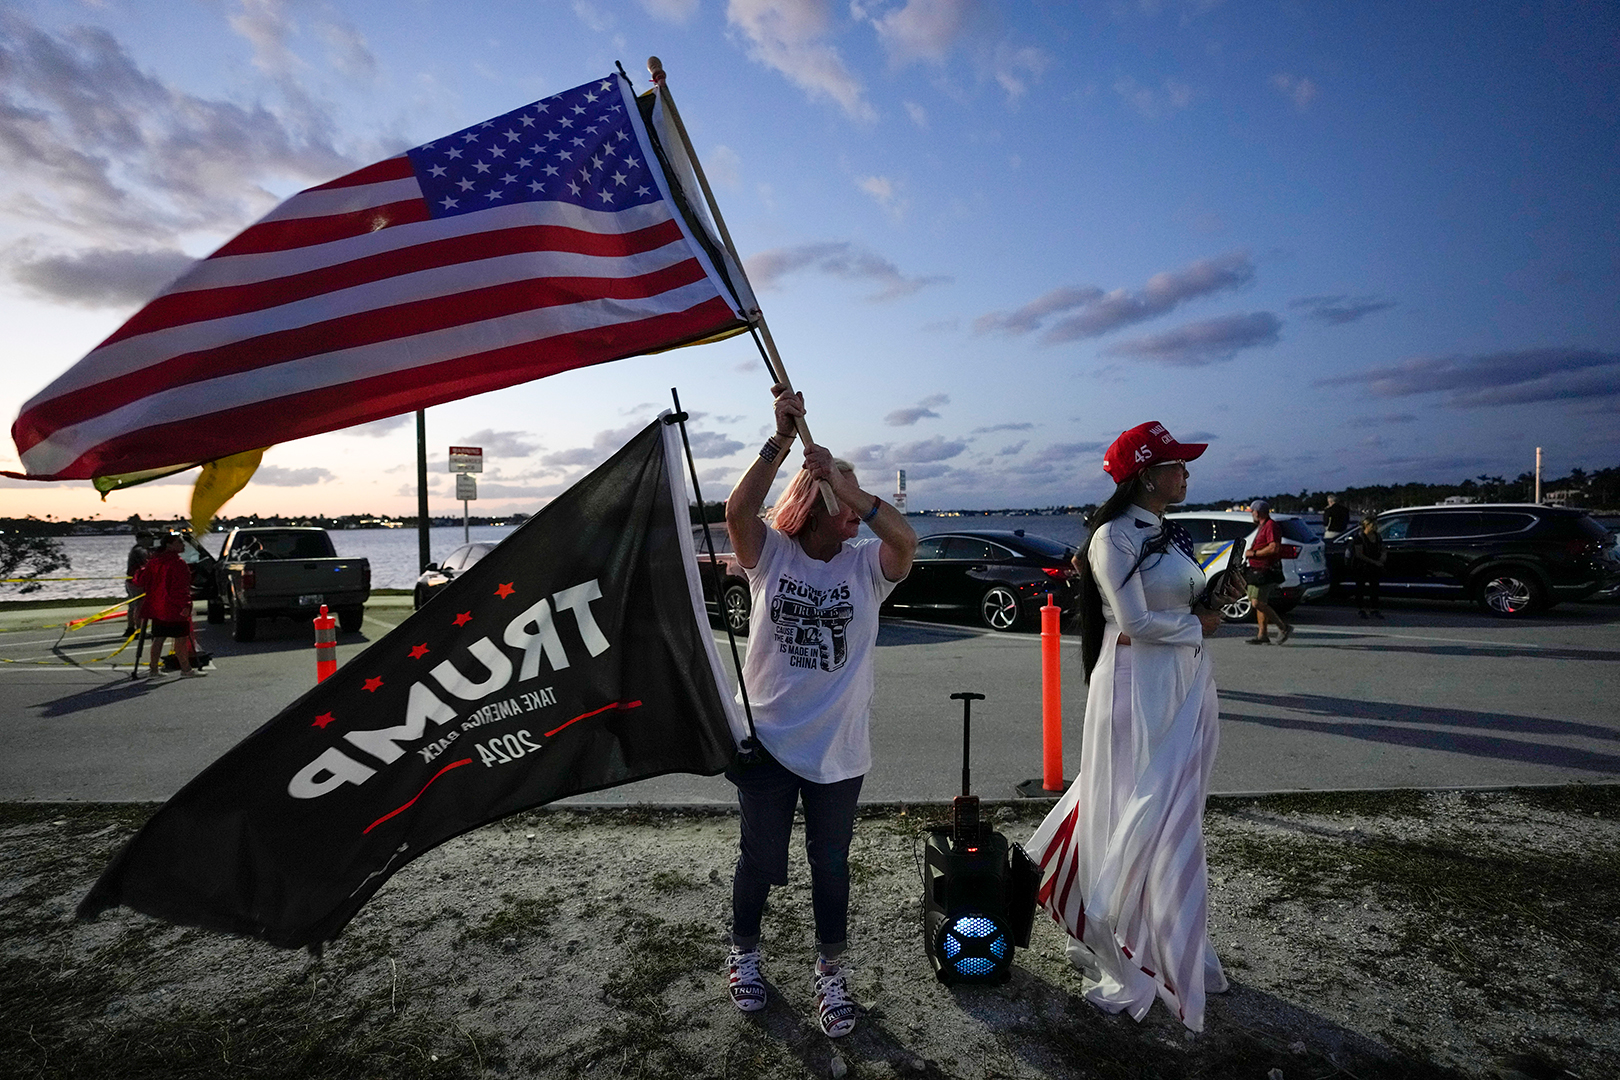 Crowd shows support for Trump near Mar-a-Lago following indictment